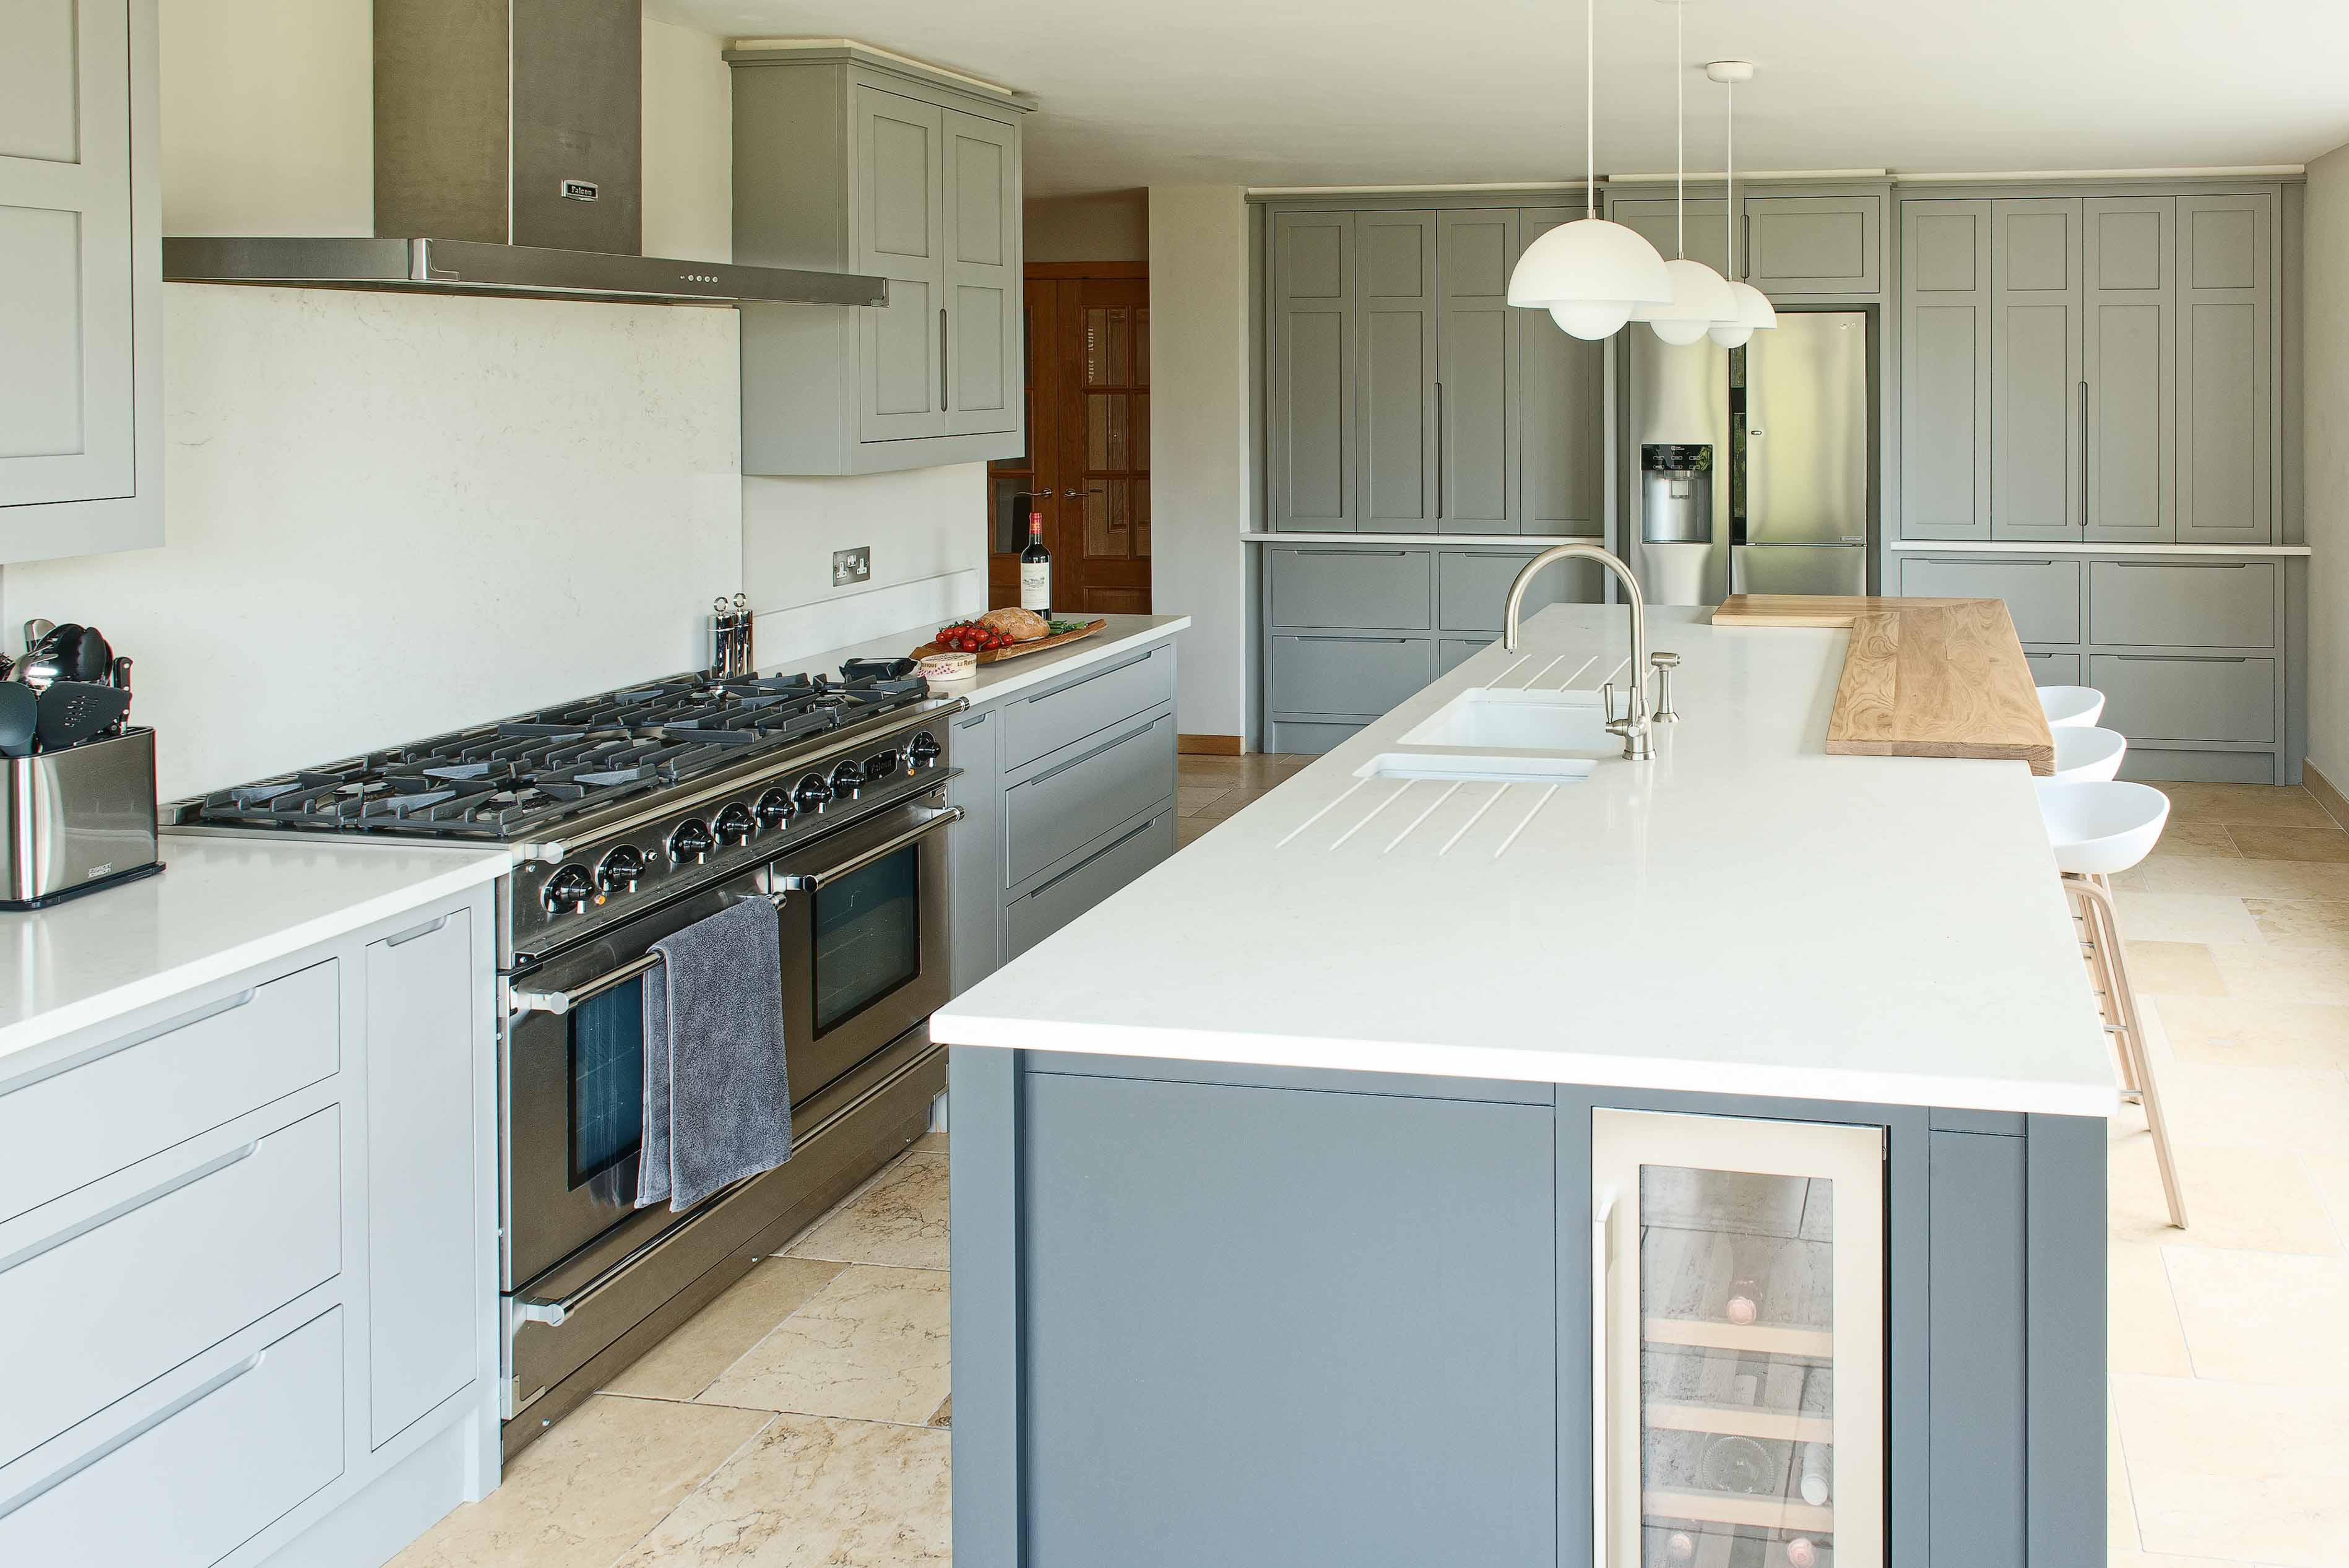 Contemporary modern shaker style bespoke kitchen falcon range cooker perrin and rowe tap sink wine cooler fisher paykel fridge pavilion grey farrow and ball Farnham Hampshire